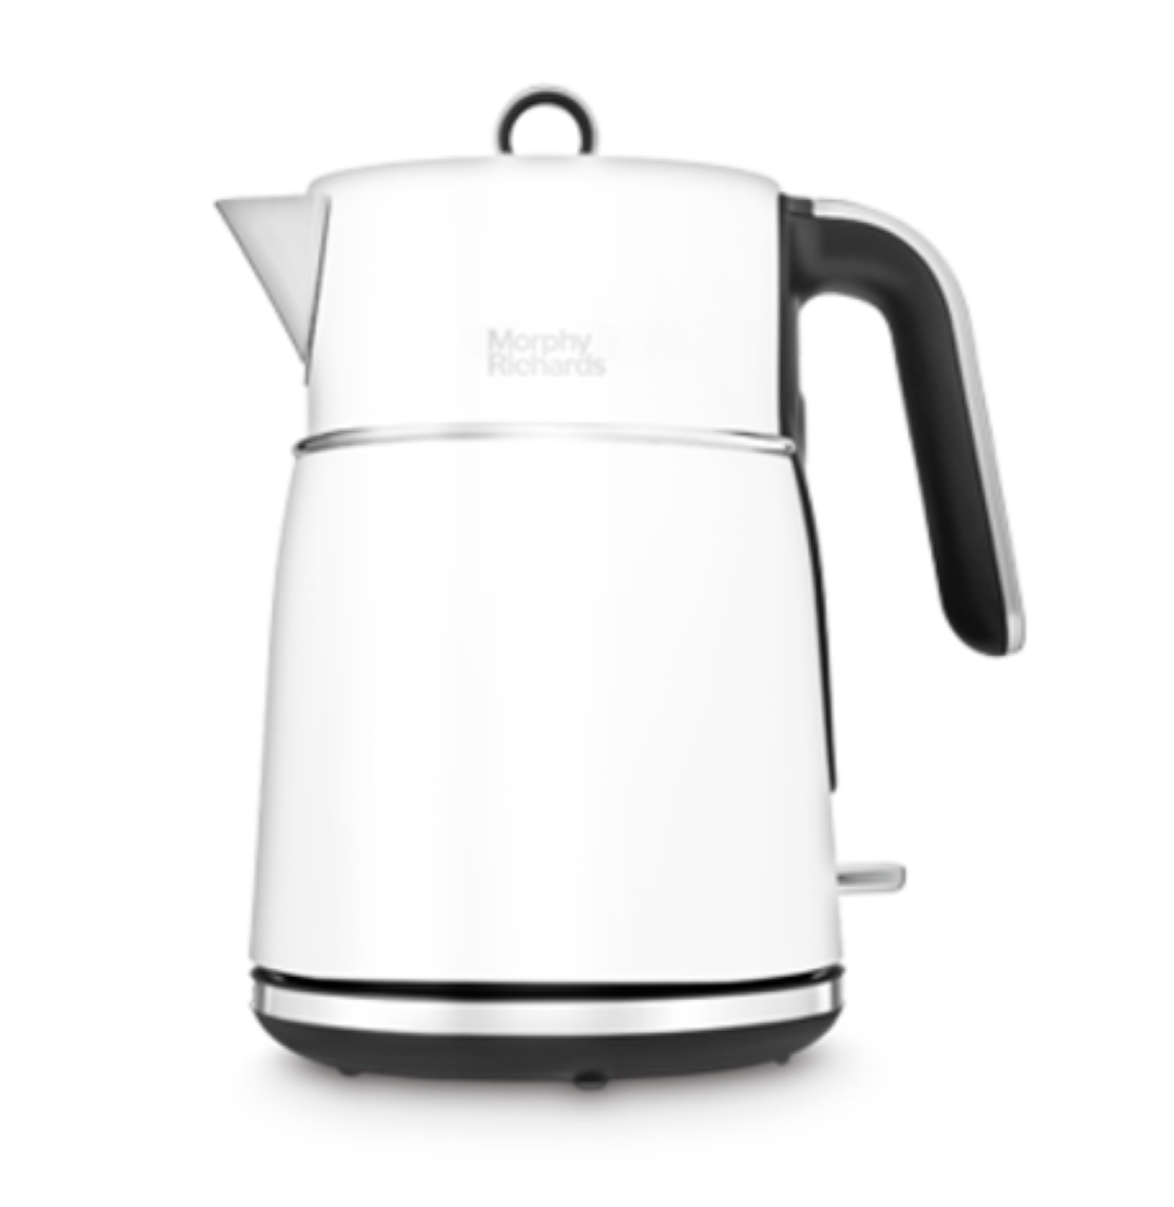 Morphy Richards Signature 1.5L 3KW Kettle in Moonlight White 100704